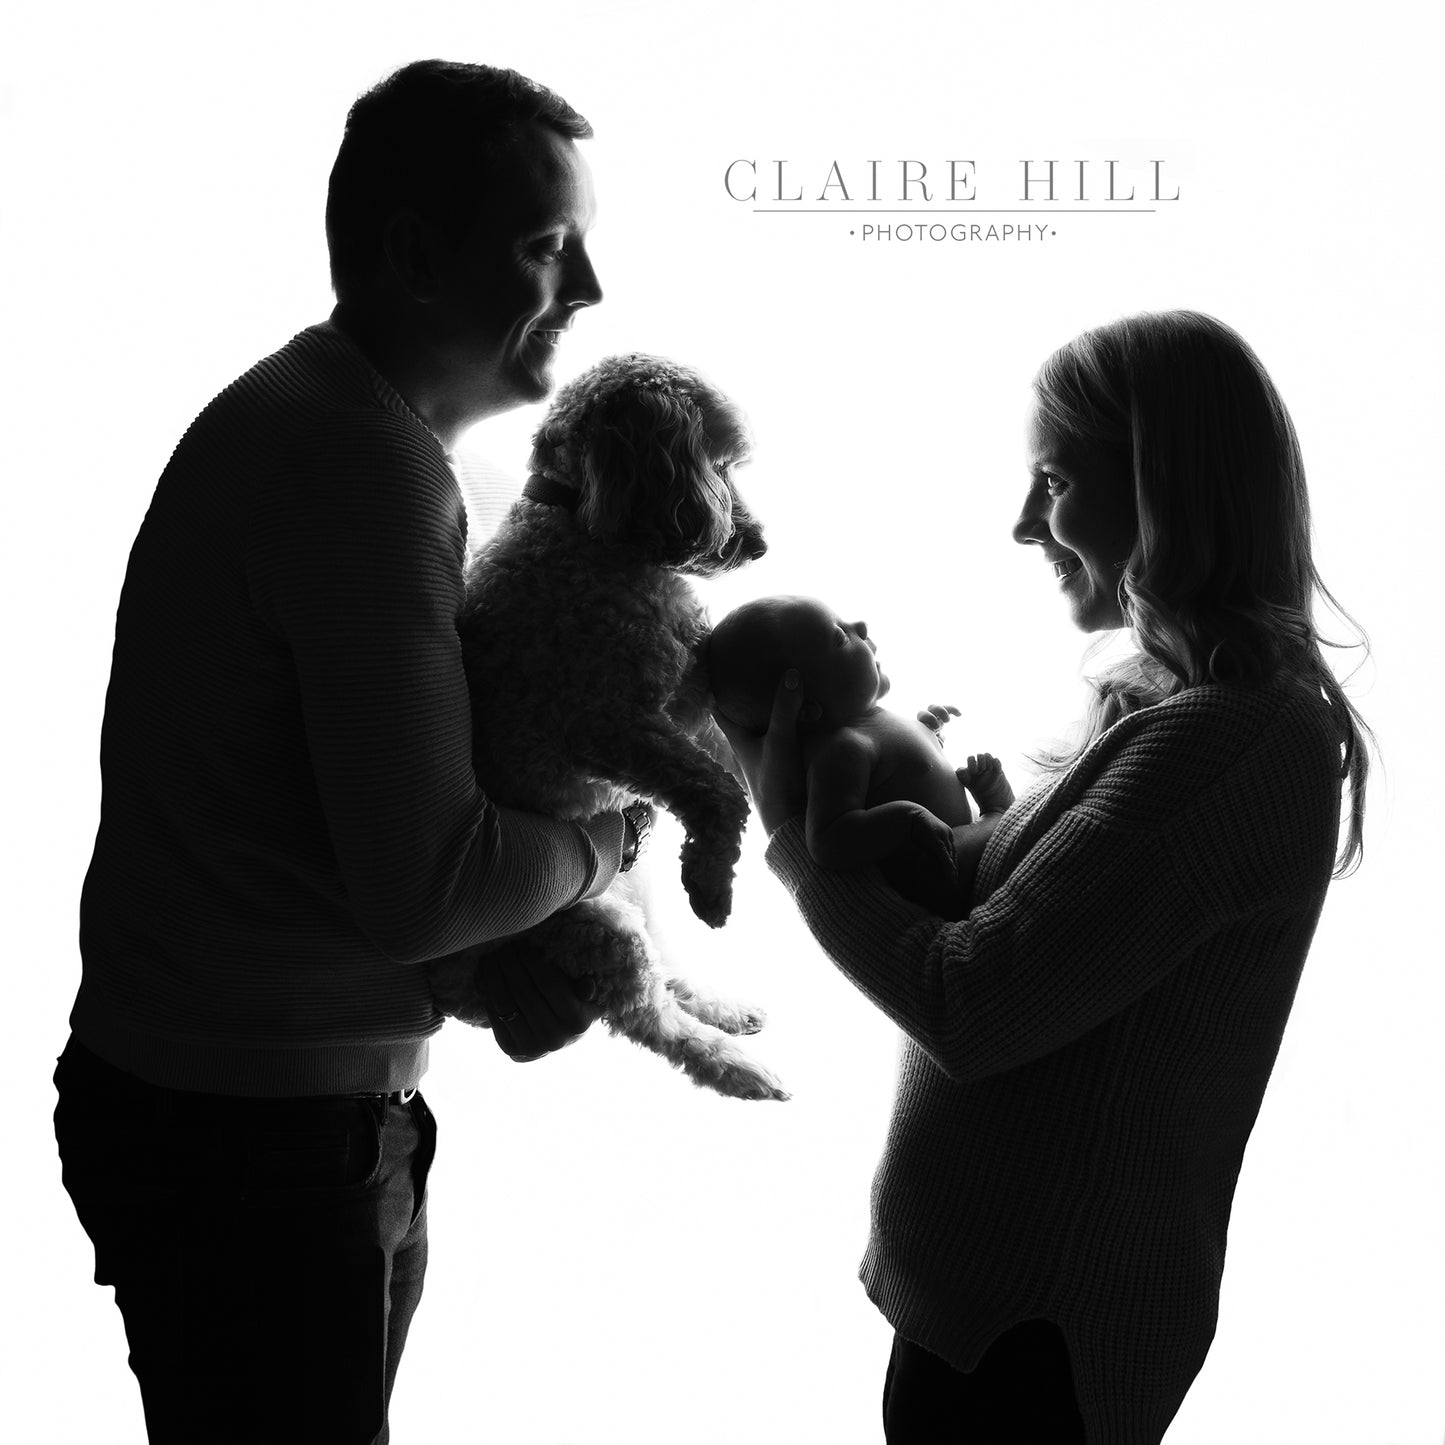 bring your pet dog newborn baby photography photos by Award winning Claire Hill Photography. Studio based in  Perton Wolverhampton West Midlands and Shropshire near Birmingham & Staffordshire book today